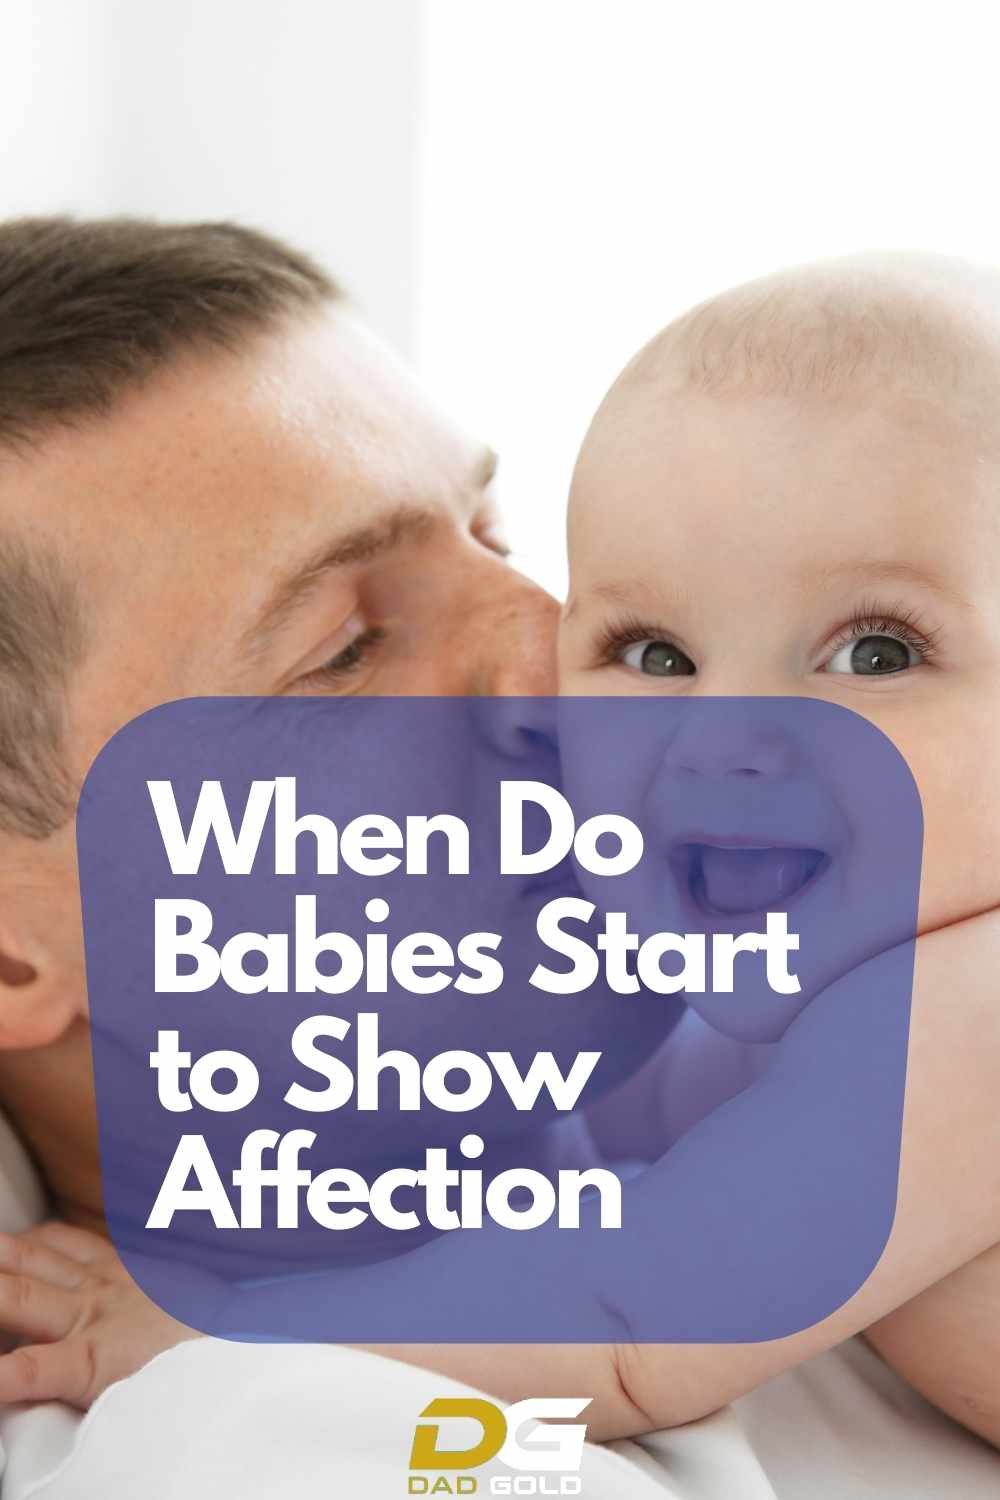 When Do Babies Start to Show Affection